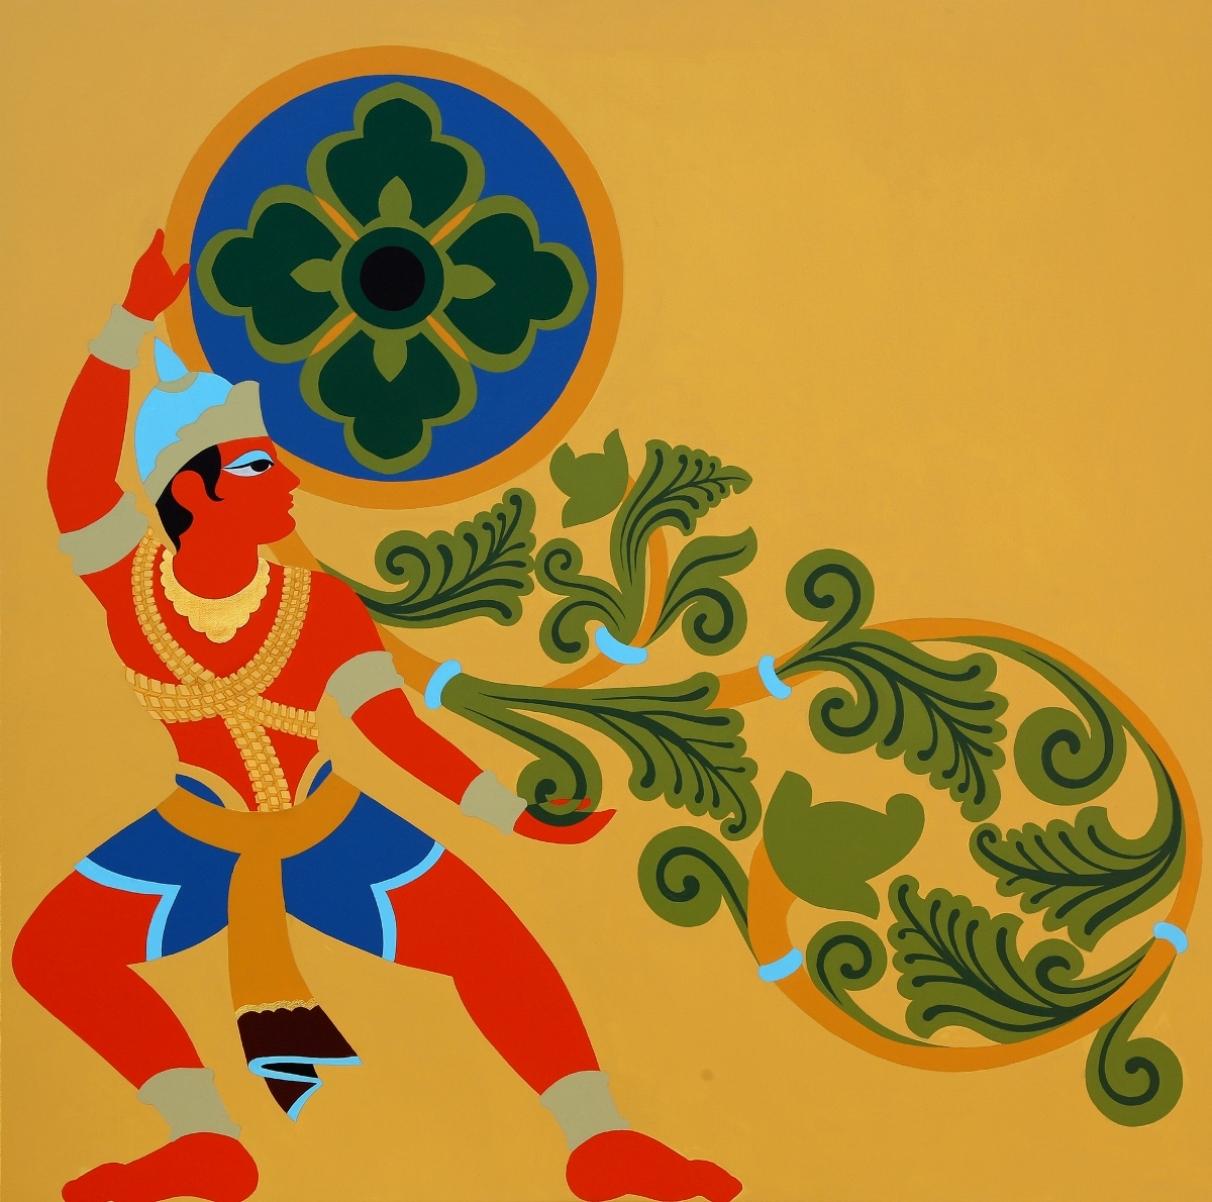 Mukesh Sharma Figurative Painting - Sur, Acrylic, Gold Leaf on Canvas by Contemporary Artist "In Stock"